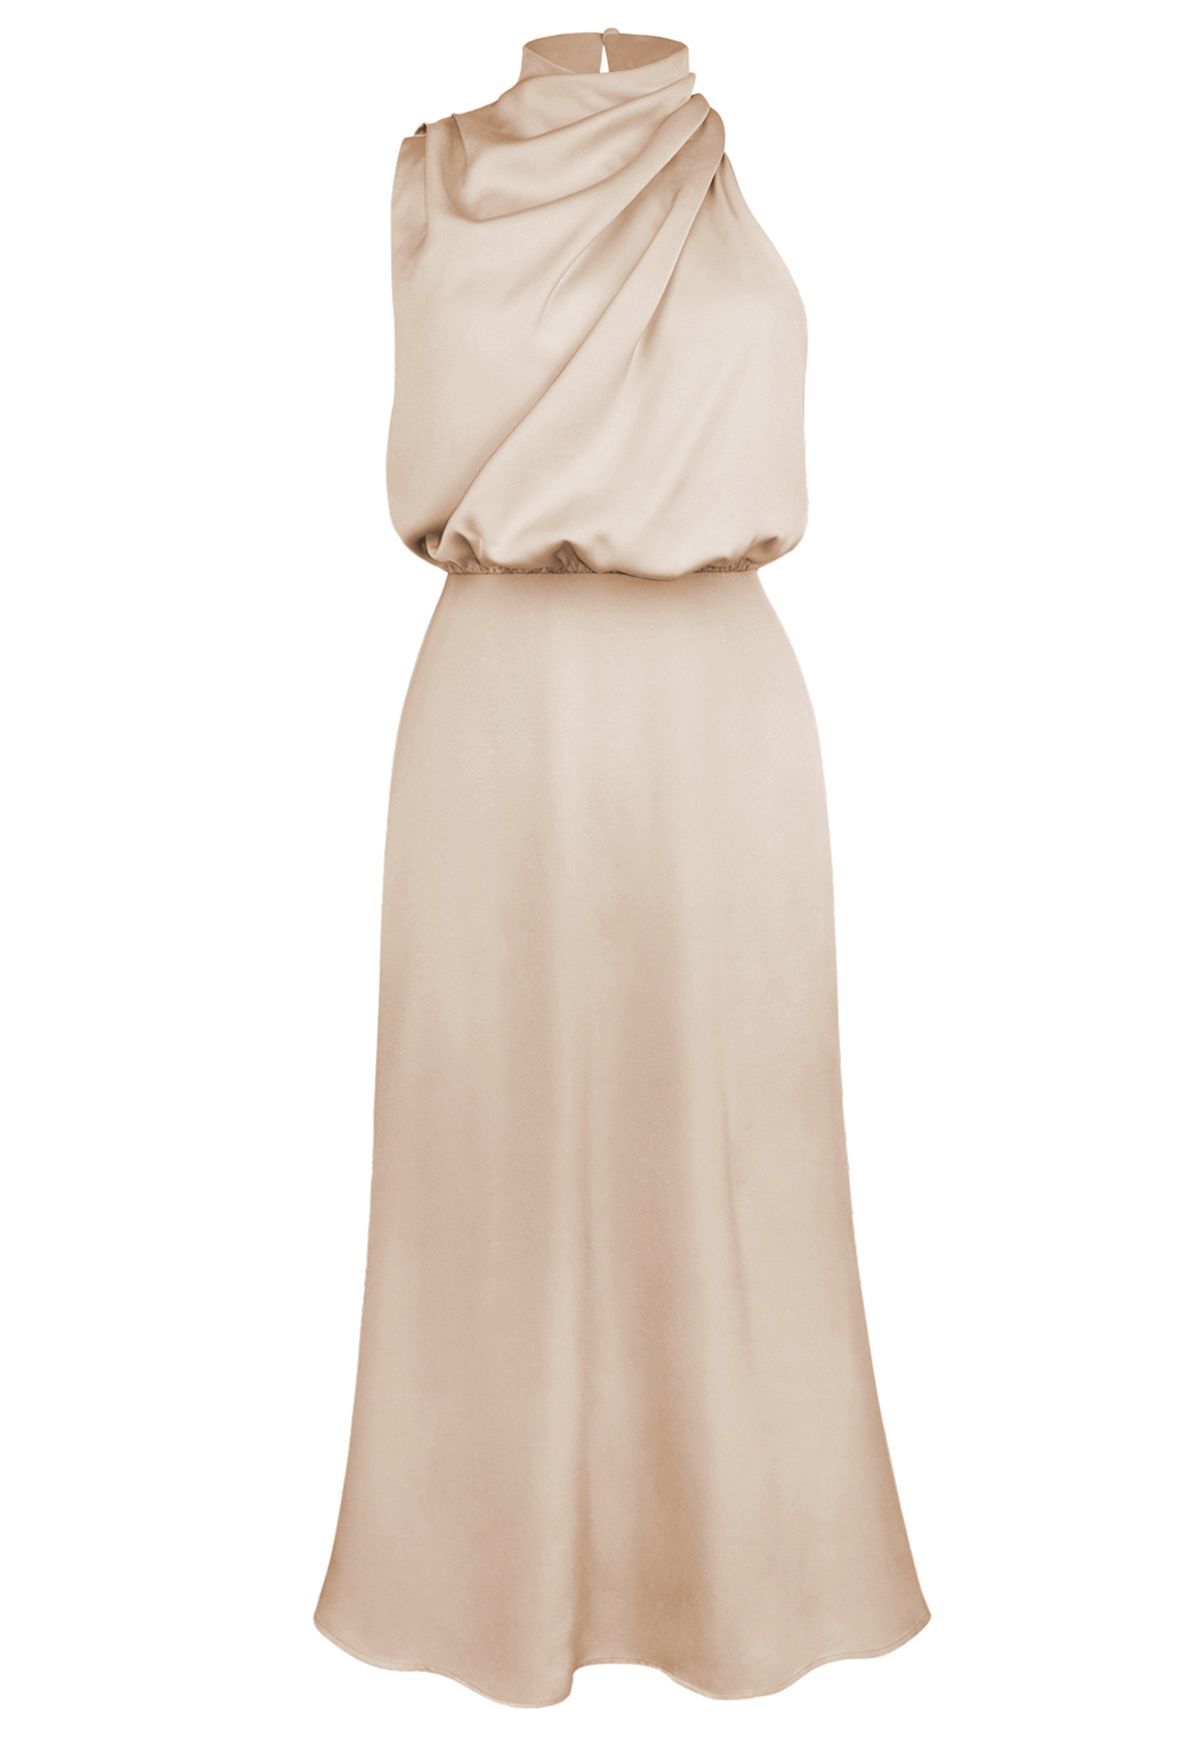 Asymmetric Ruched Neckline Sleeveless Dress in Apricot | Chicwish